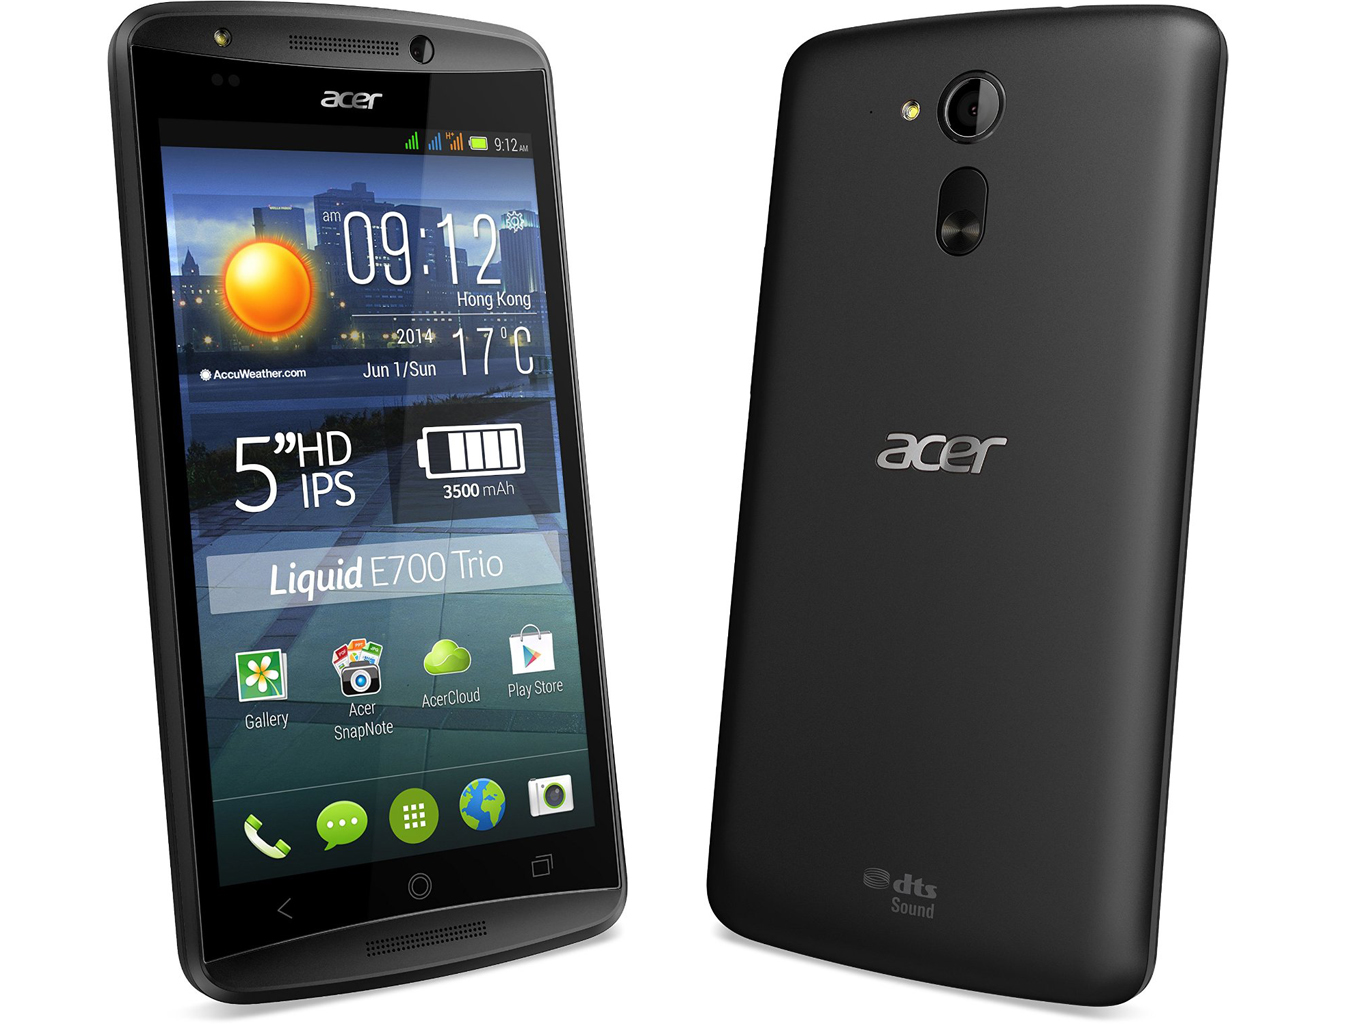 How to Root Acer Liquid E700 with Magisk without TWRP